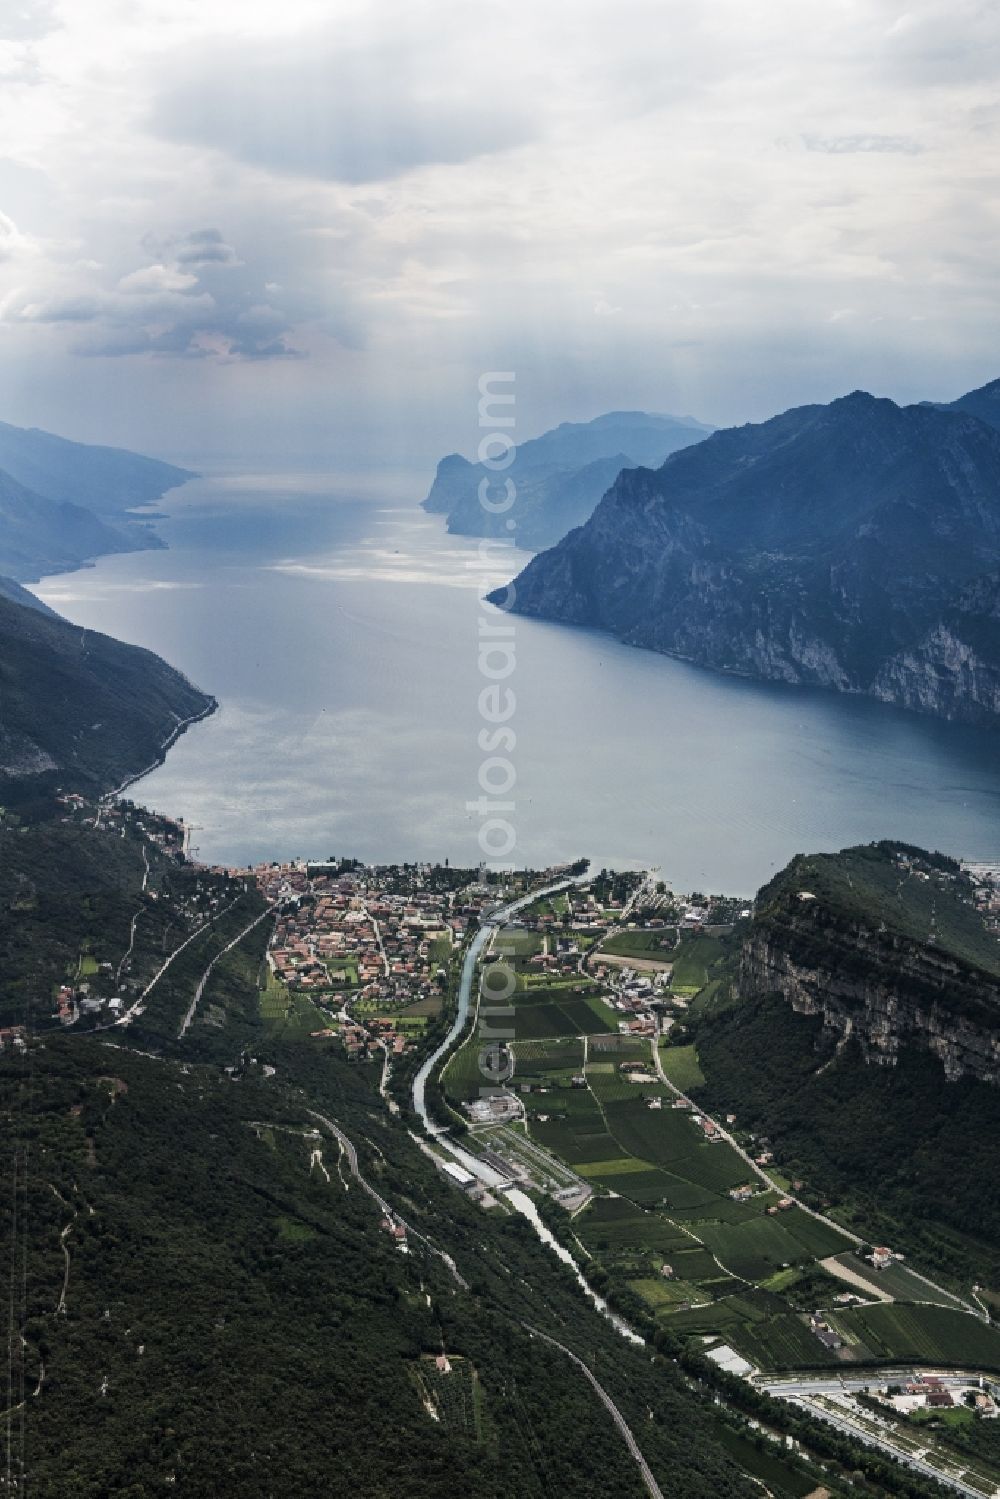 Naag-Turbel from above - City view of Torbole at the northern bank of the Gardasee in the province Trient in Italy. The city and the Gardasee are surrounded by mountains. The Sarca flows through the city